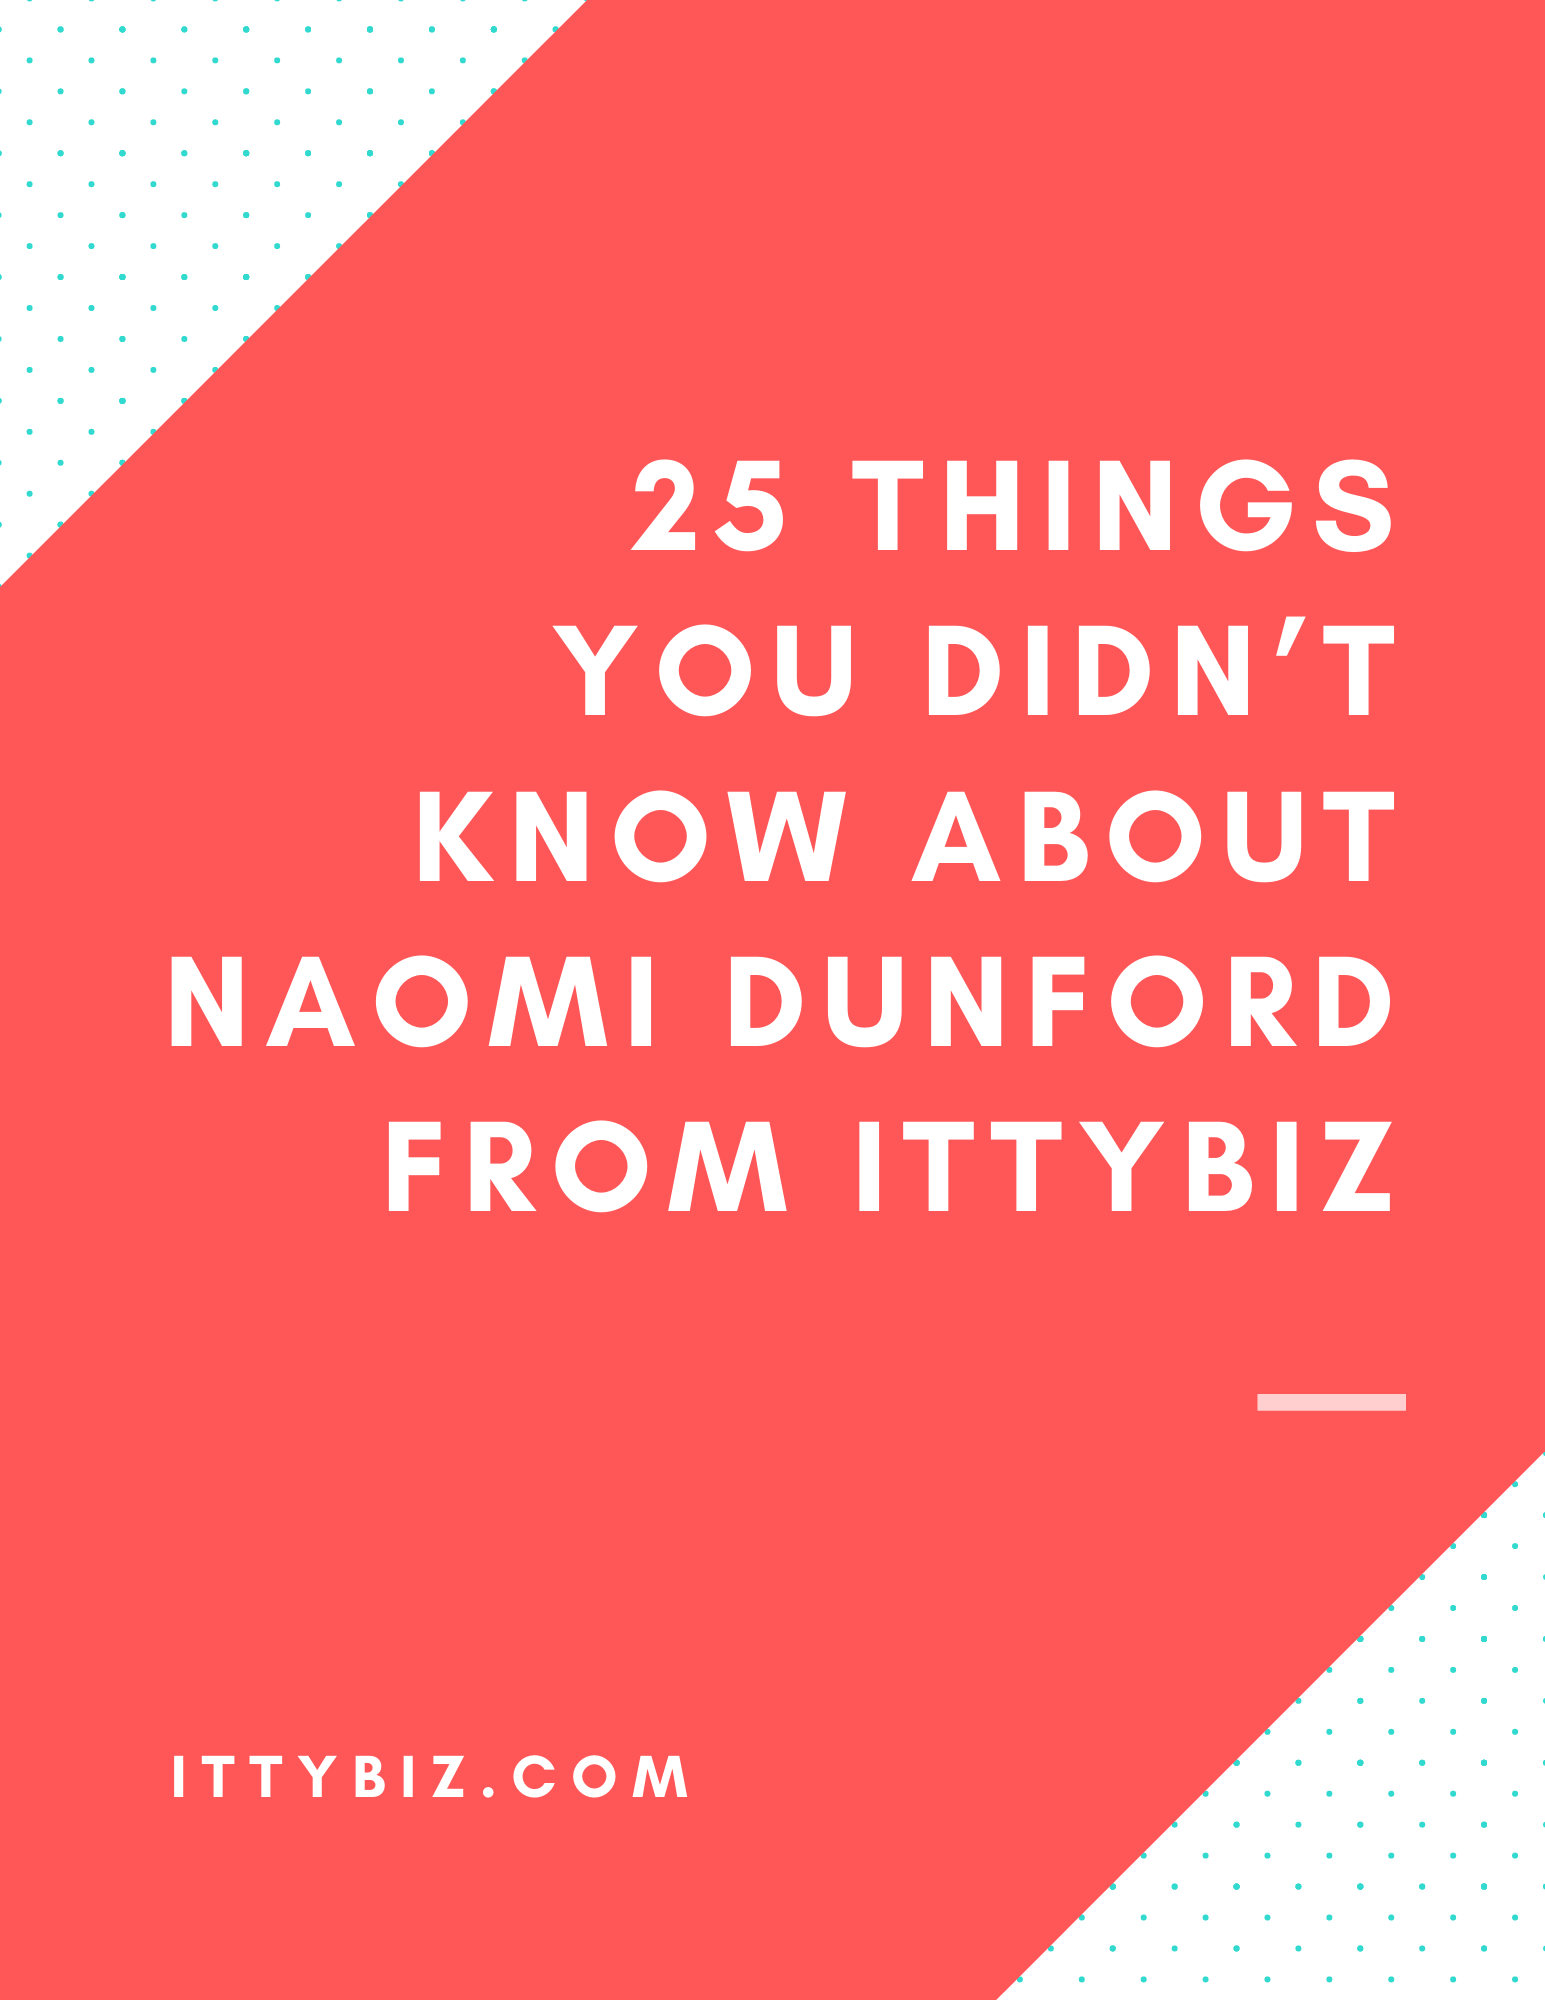 25 Things You Didn't Know About Naomi Dunford From IttyBiz